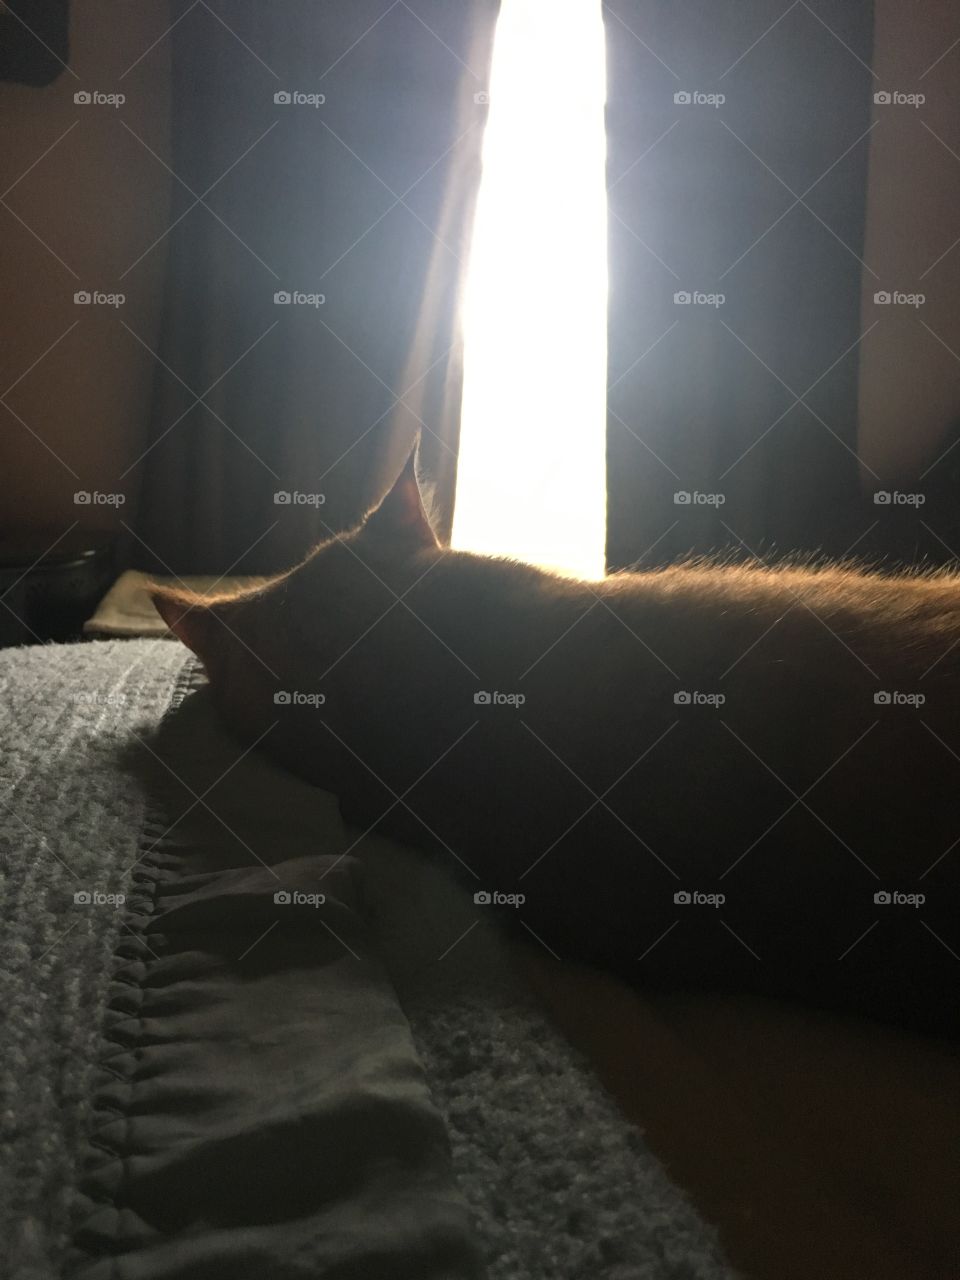 My cat landing peacefully looking out the window. 